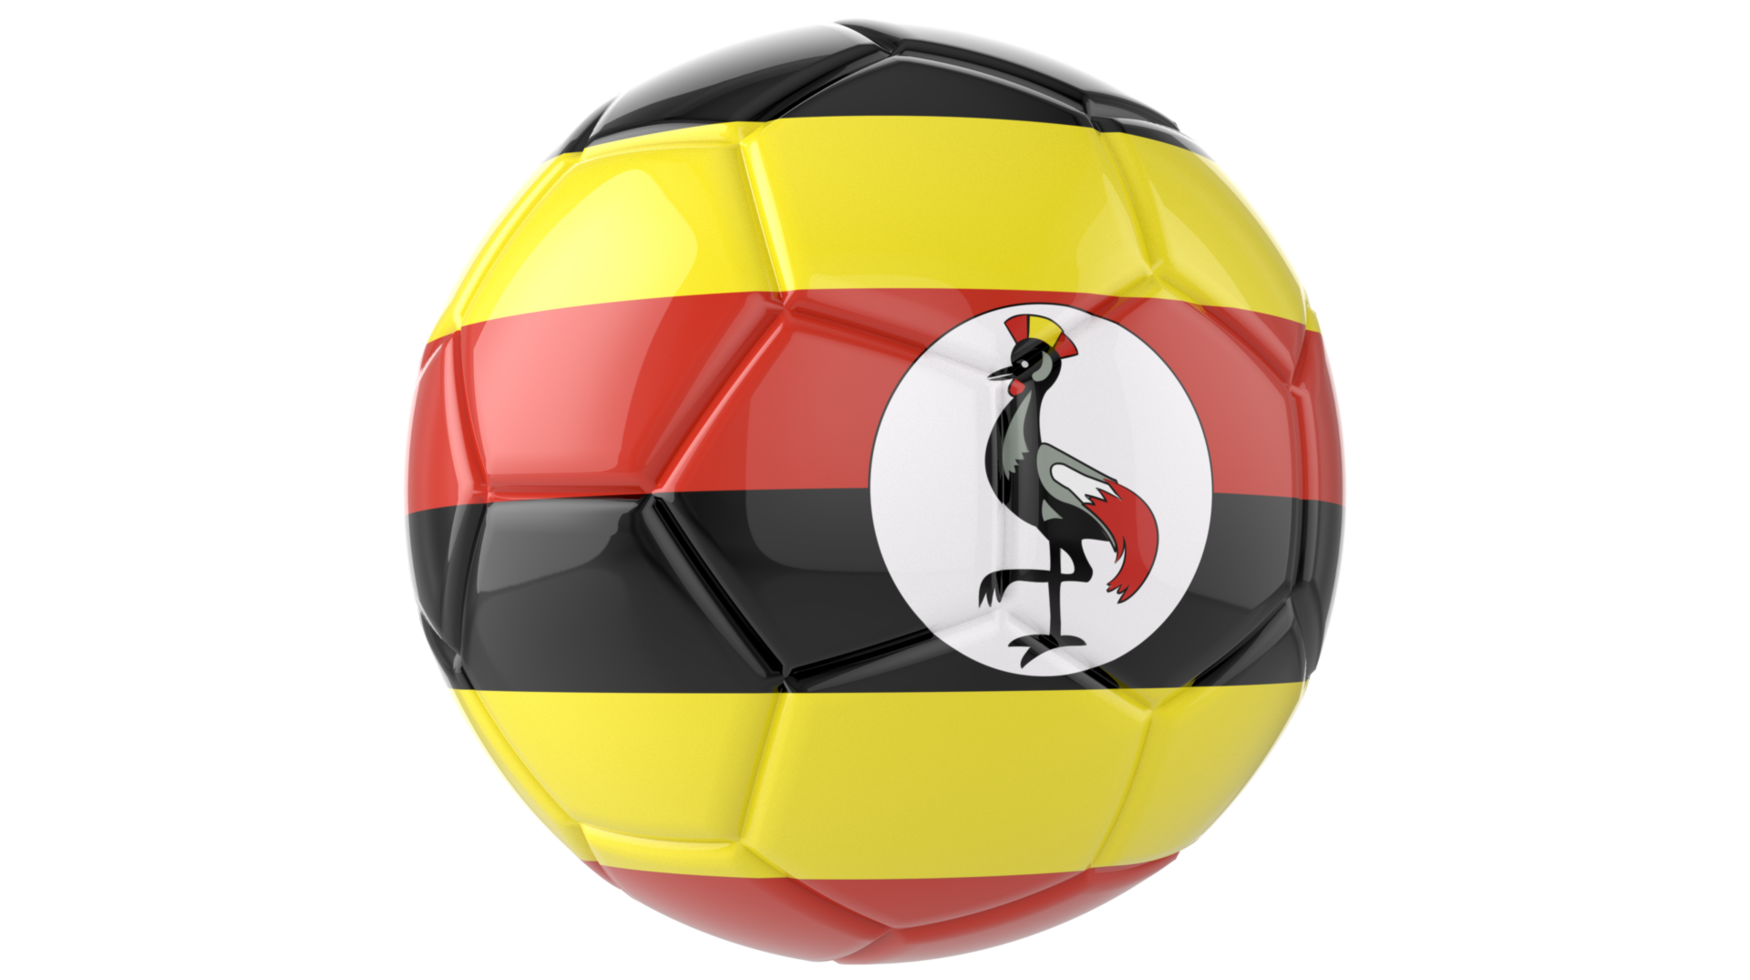 3d realistic soccer ball with the flag of Uganda on it isolated on transparent PNG background